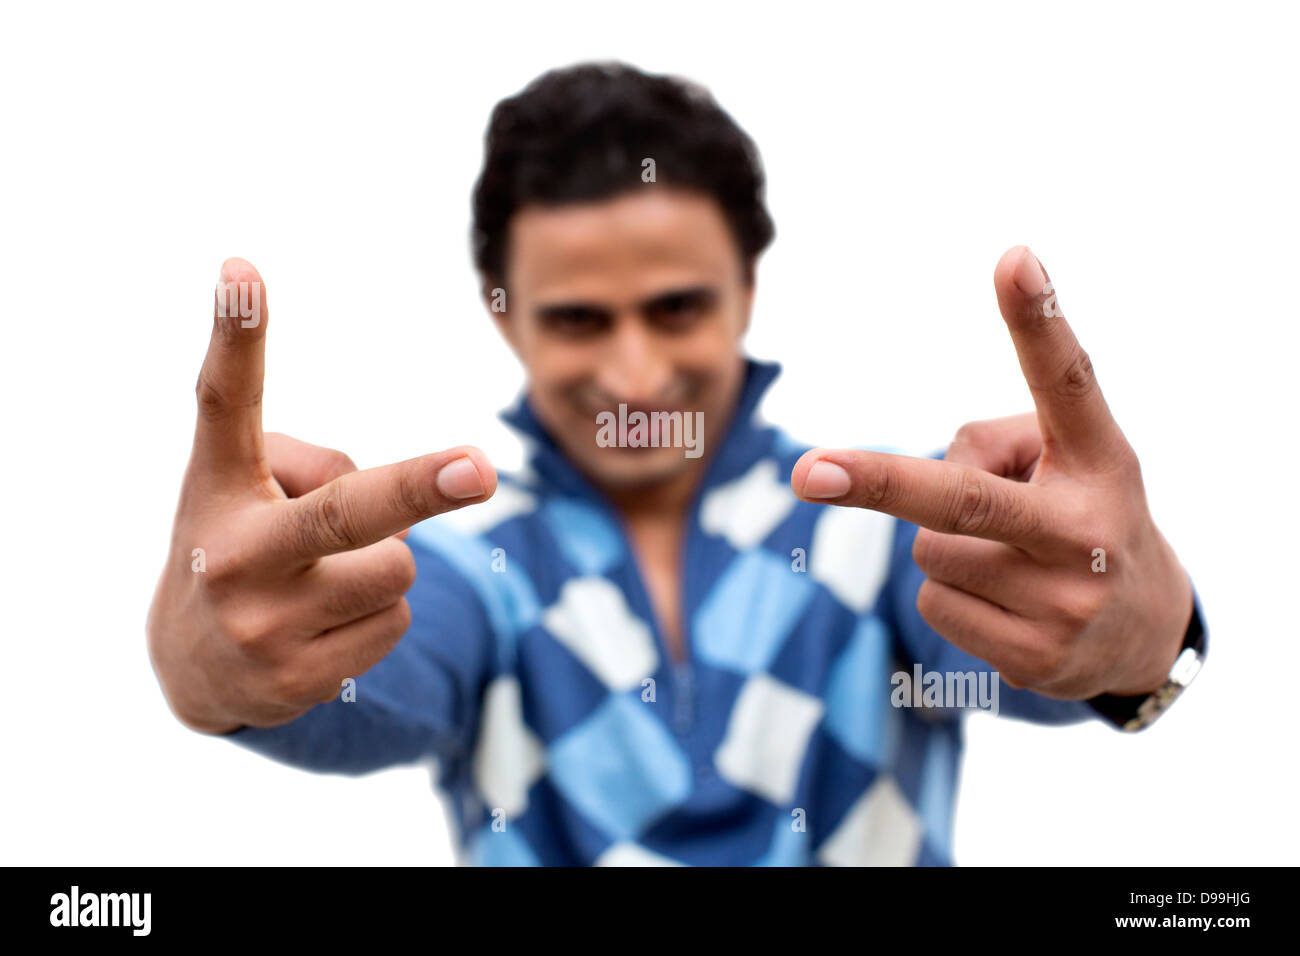 Portrait of a man showing victory sign Stock Photo